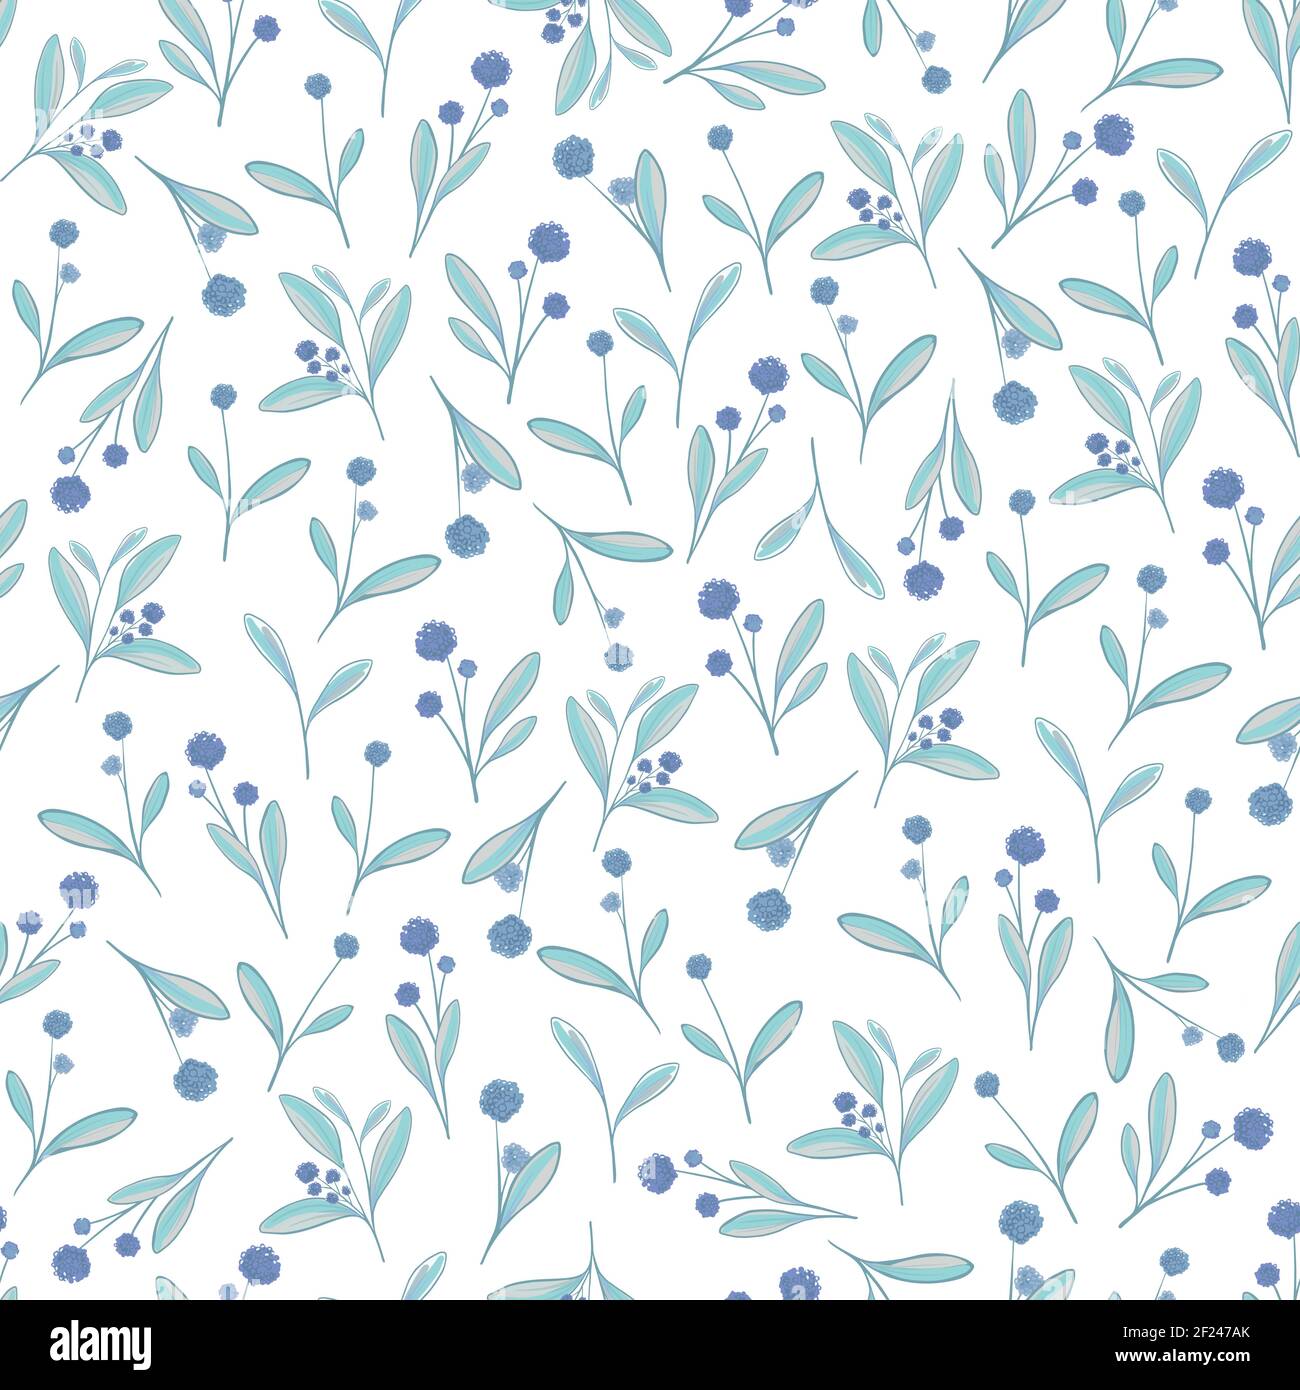 delicate floral vector pattern. delicate mint-colored flowers with